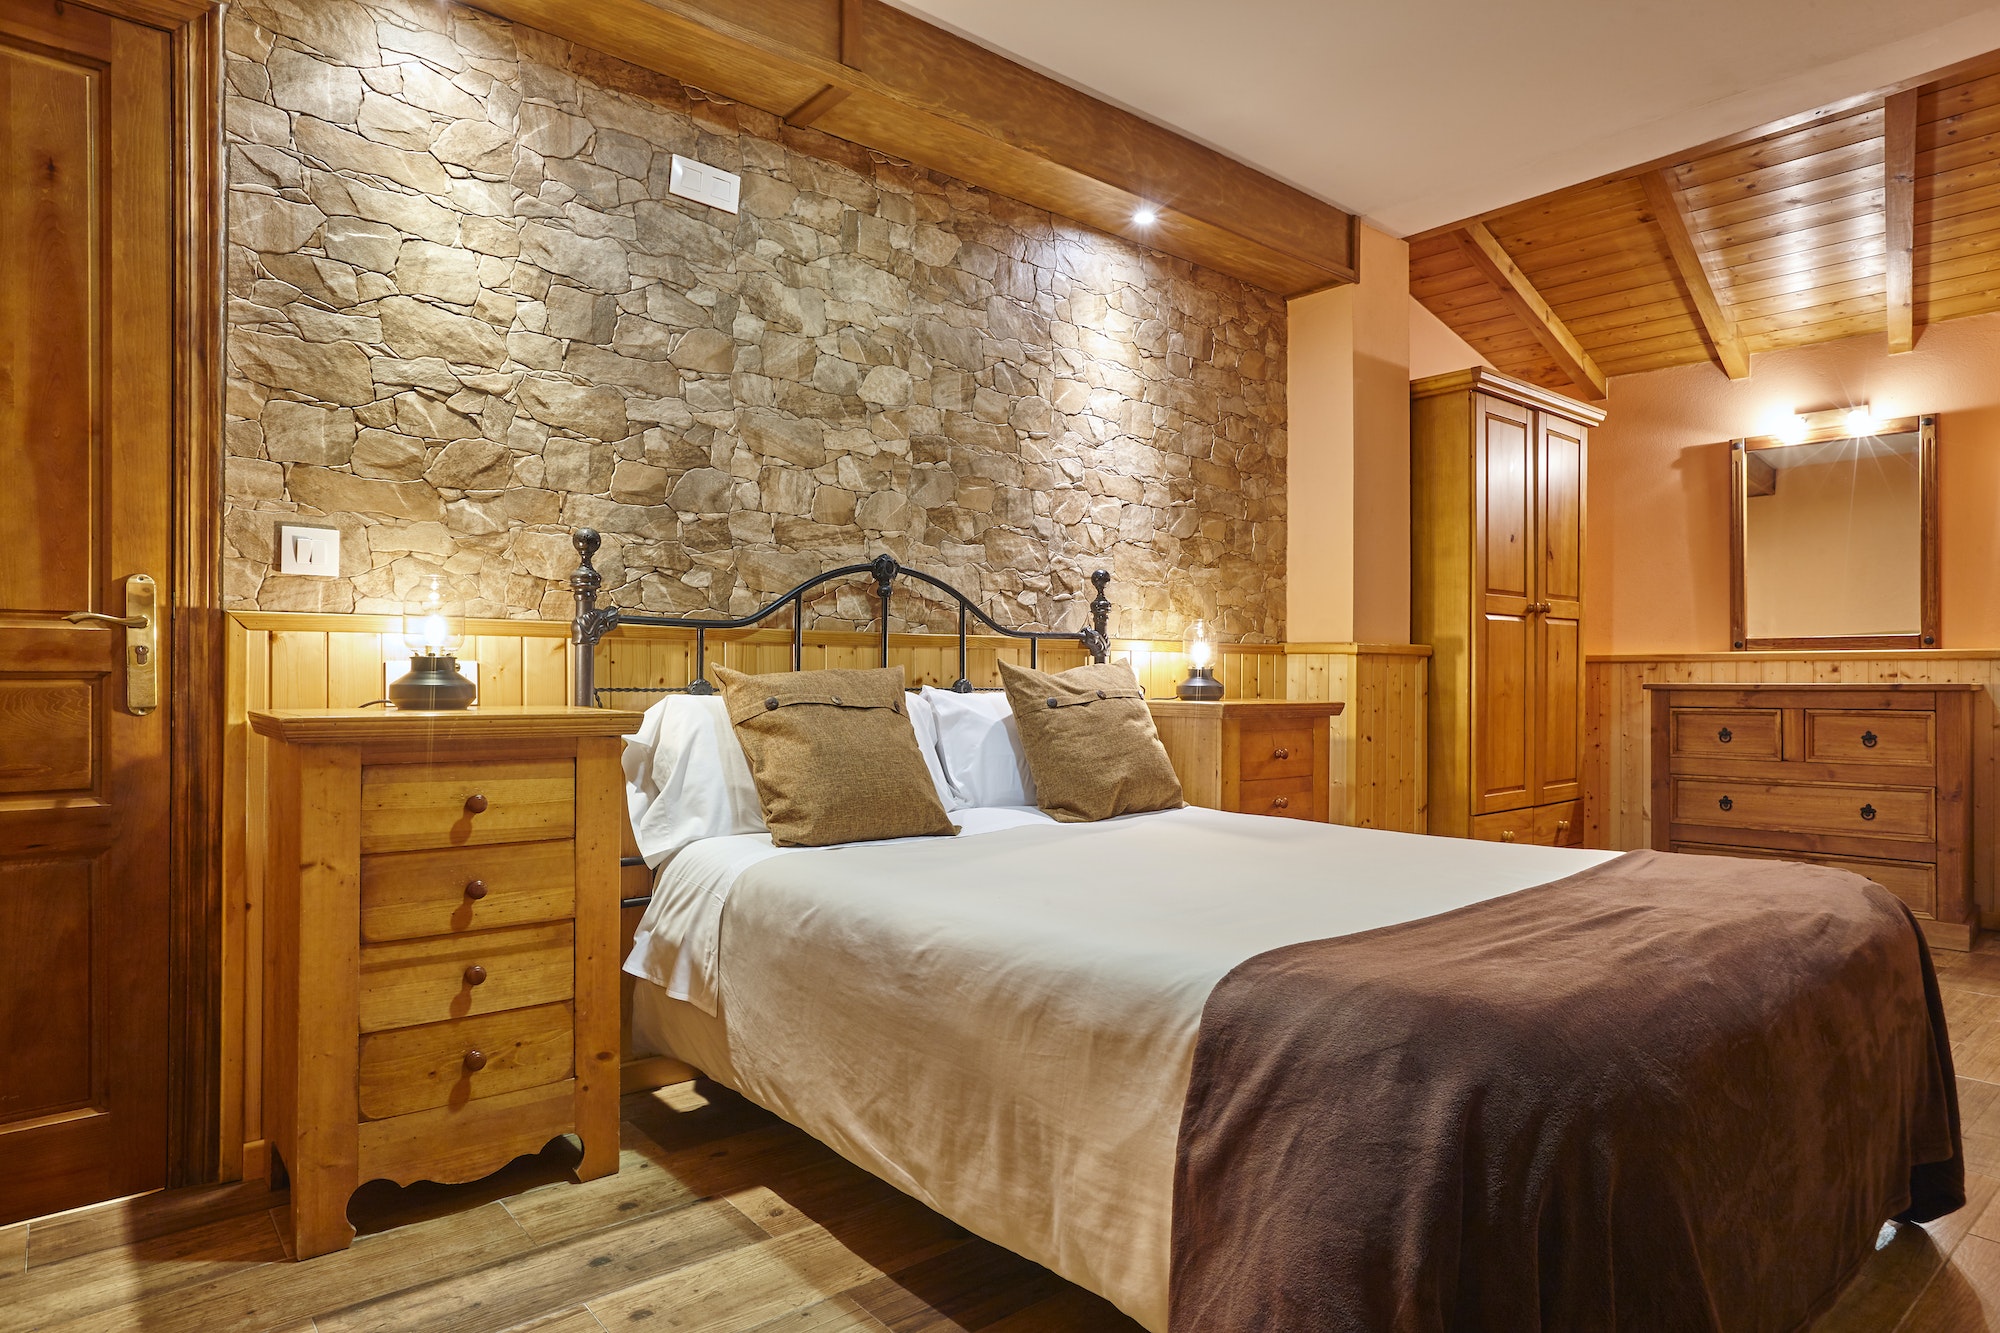 Rustic style bedroom indoor. Wood and stone decoration. Nobody